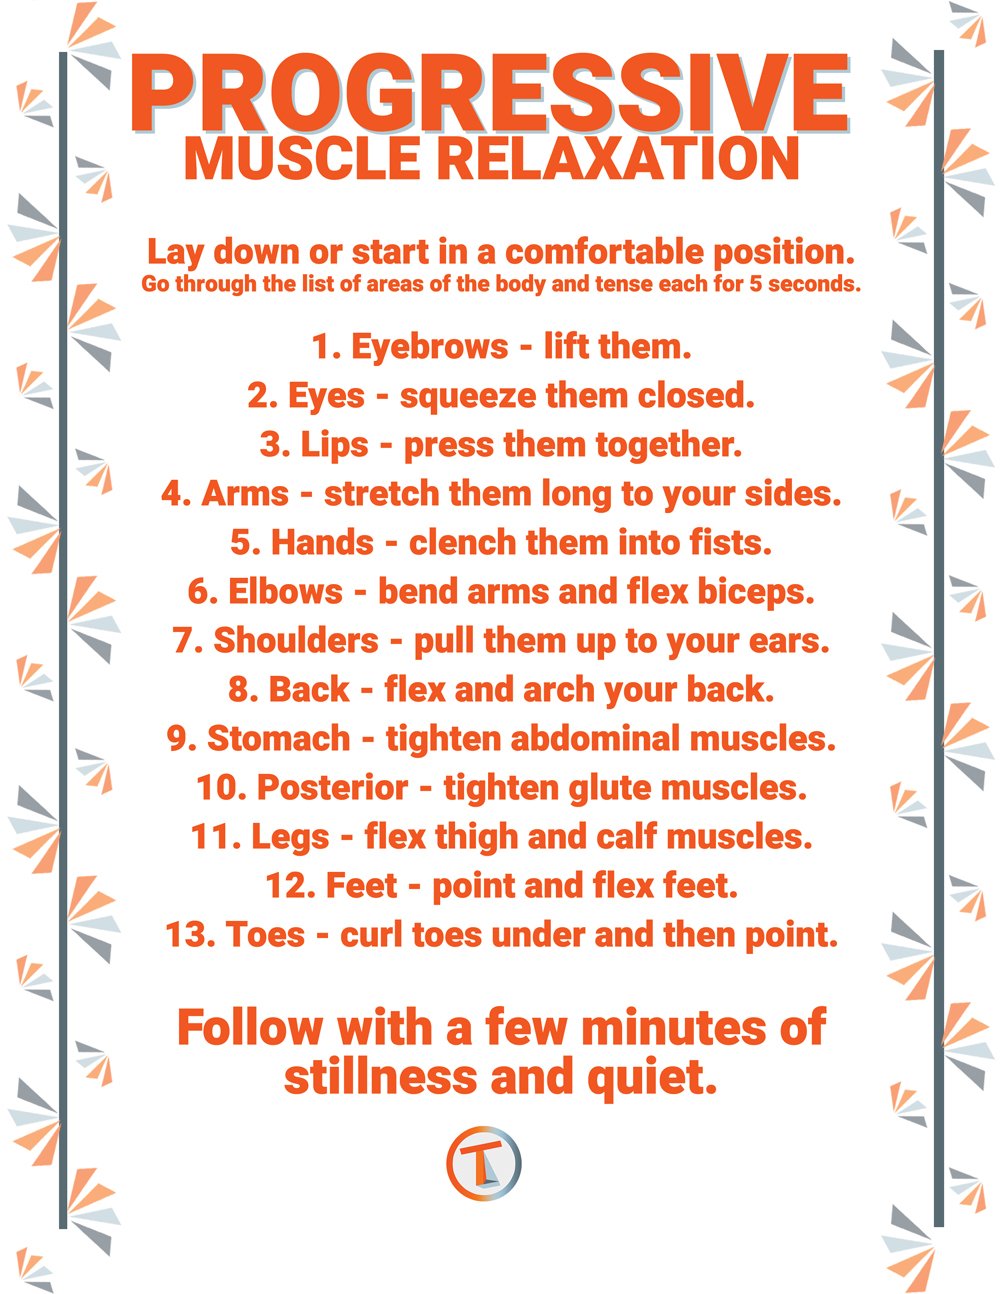 Progressive Muscle Relaxation - What Is It & How To Do